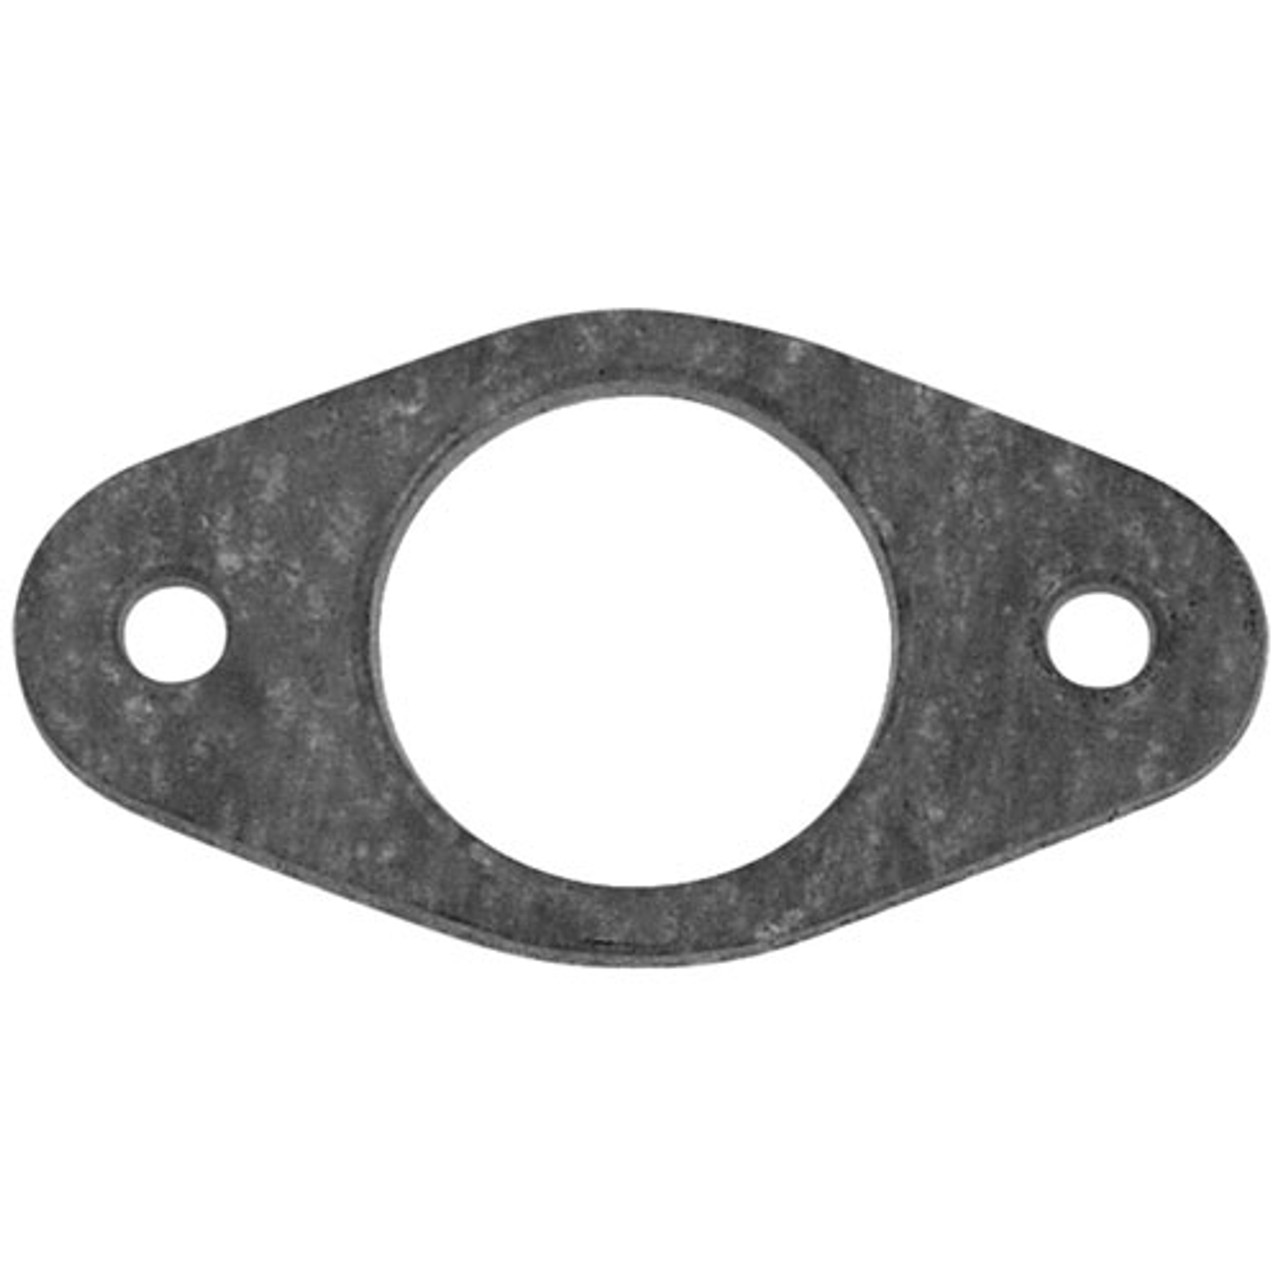 Burner Gasket 2-11/16" X 1-3/4" - Replacement Part For Hobart 714910